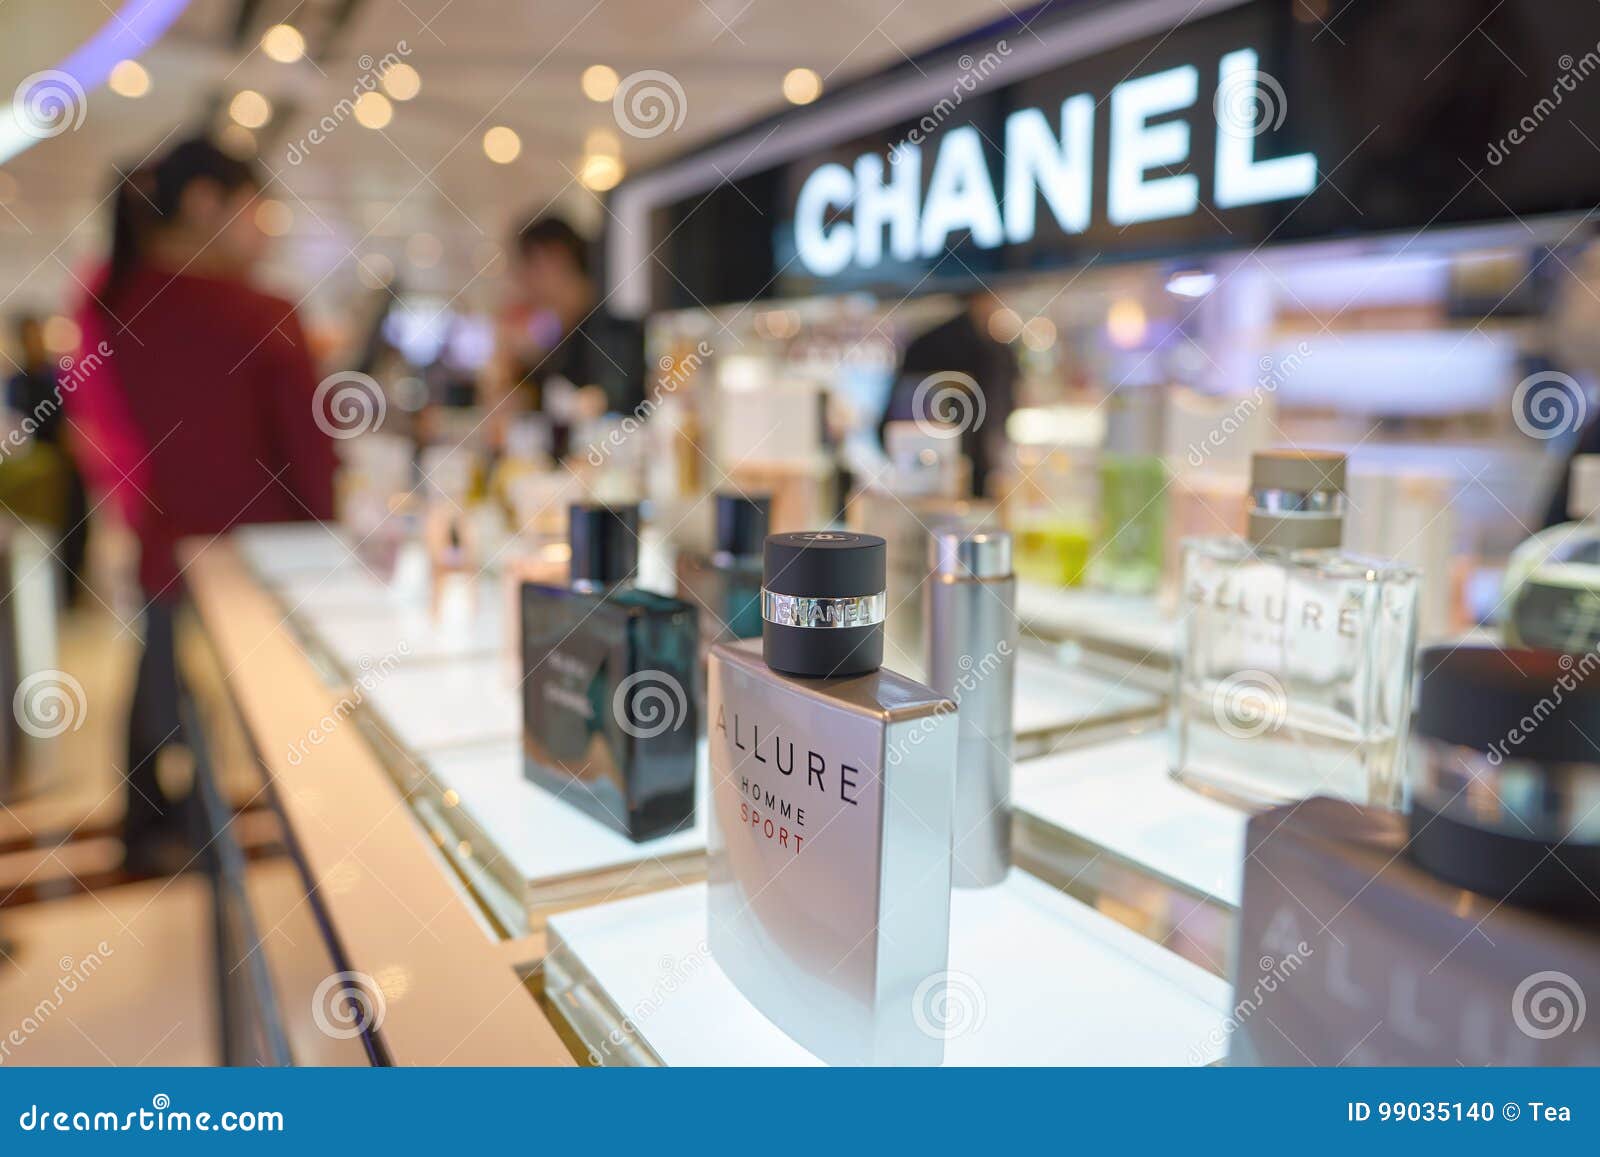 Chanel Allure Homme Edition Blanche 3D Model $19 - .max .fbx .obj .unknown  - Free3D